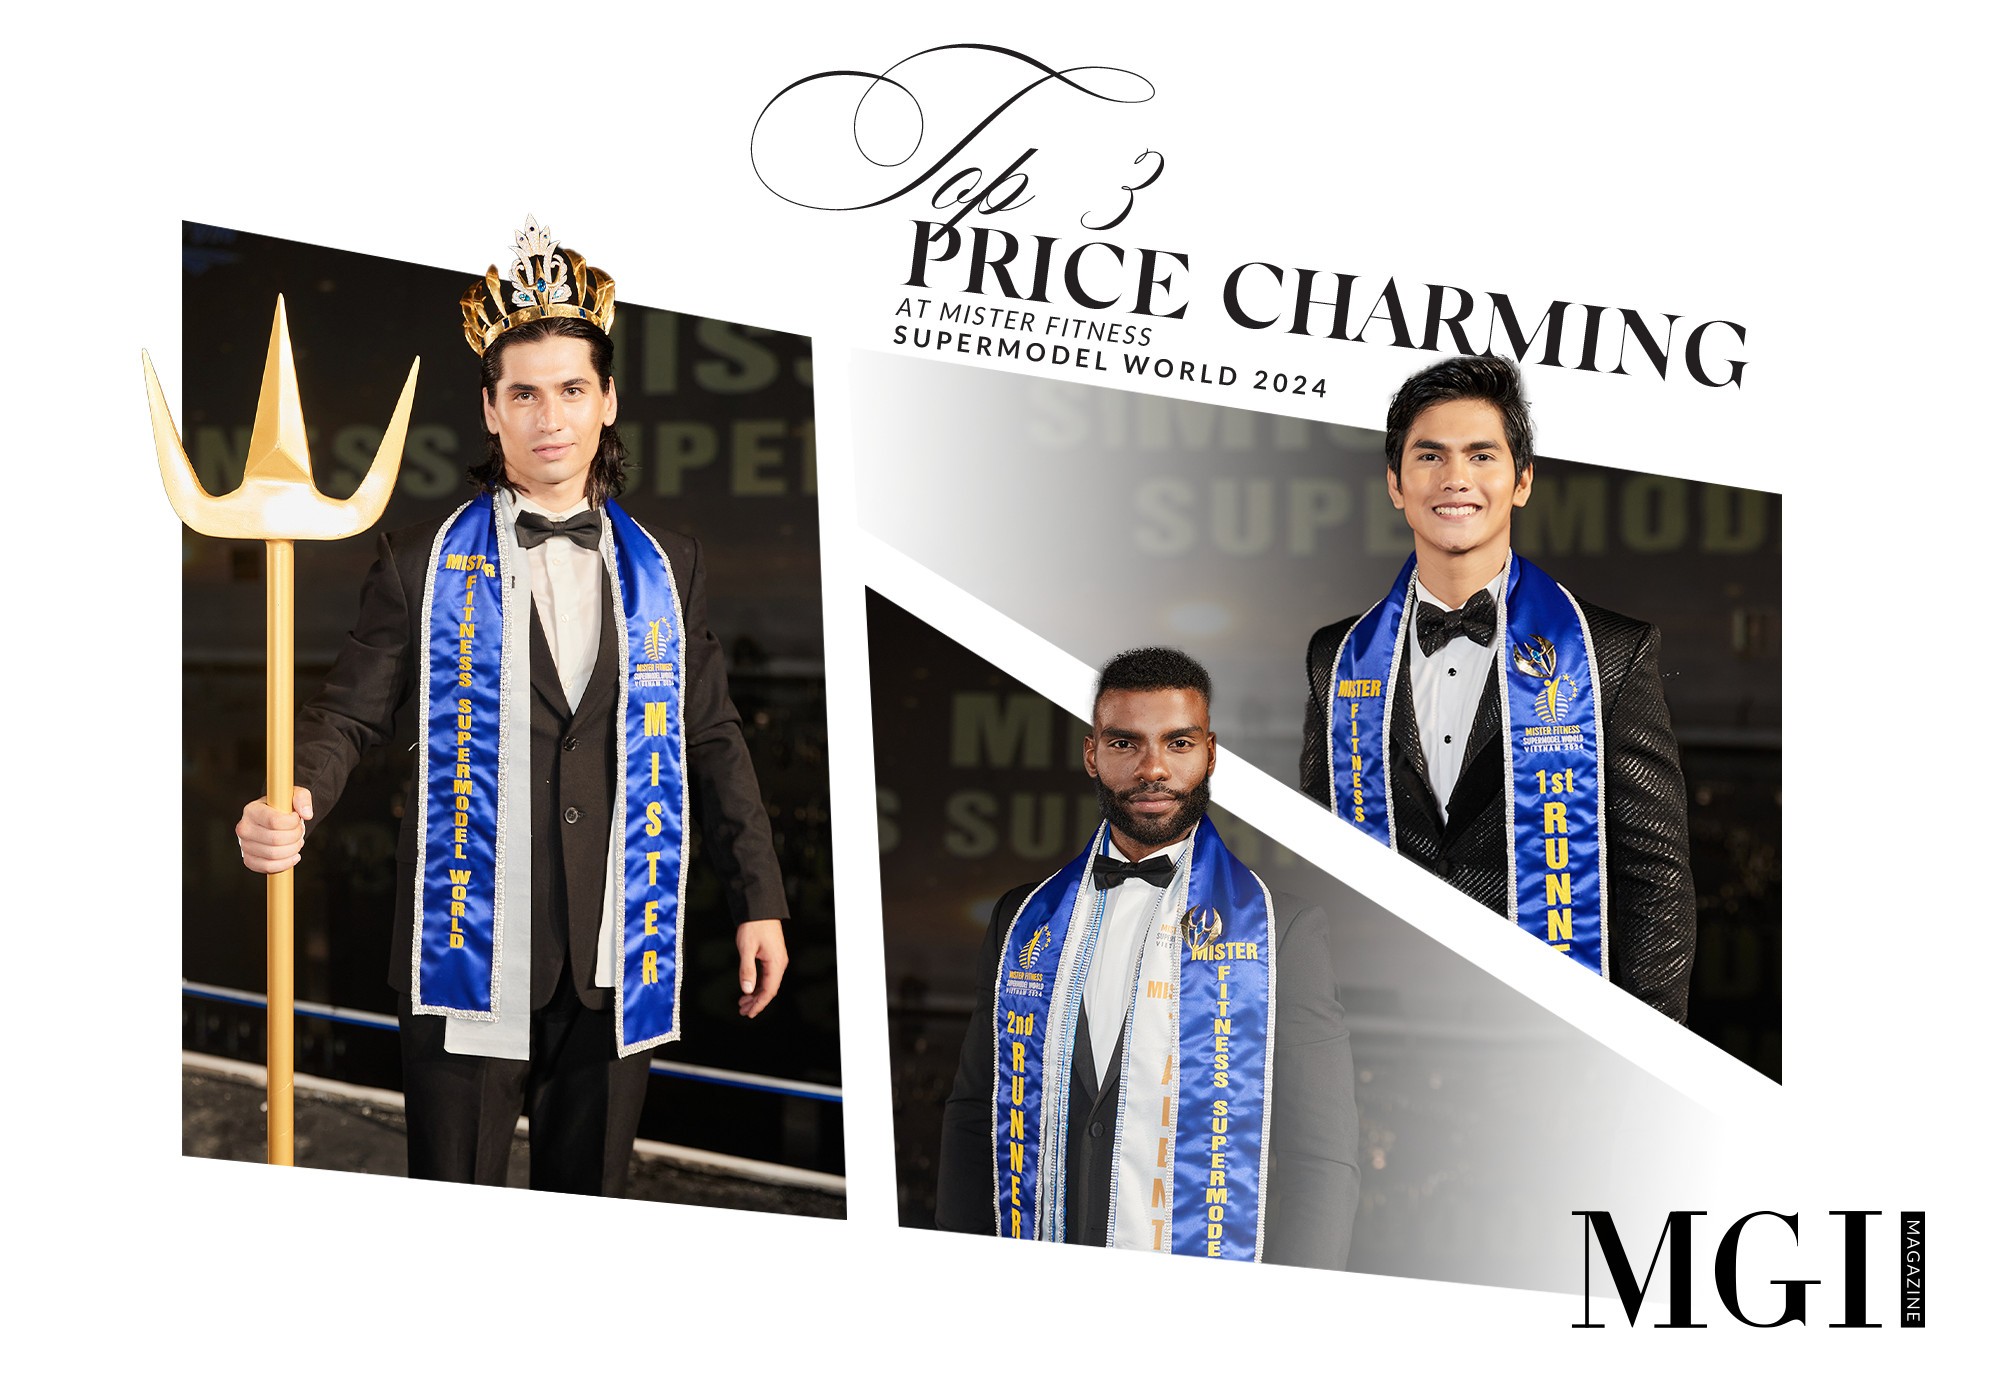 Top 3 “Prince Charming” at Mister Fitness Supermodel World 2024